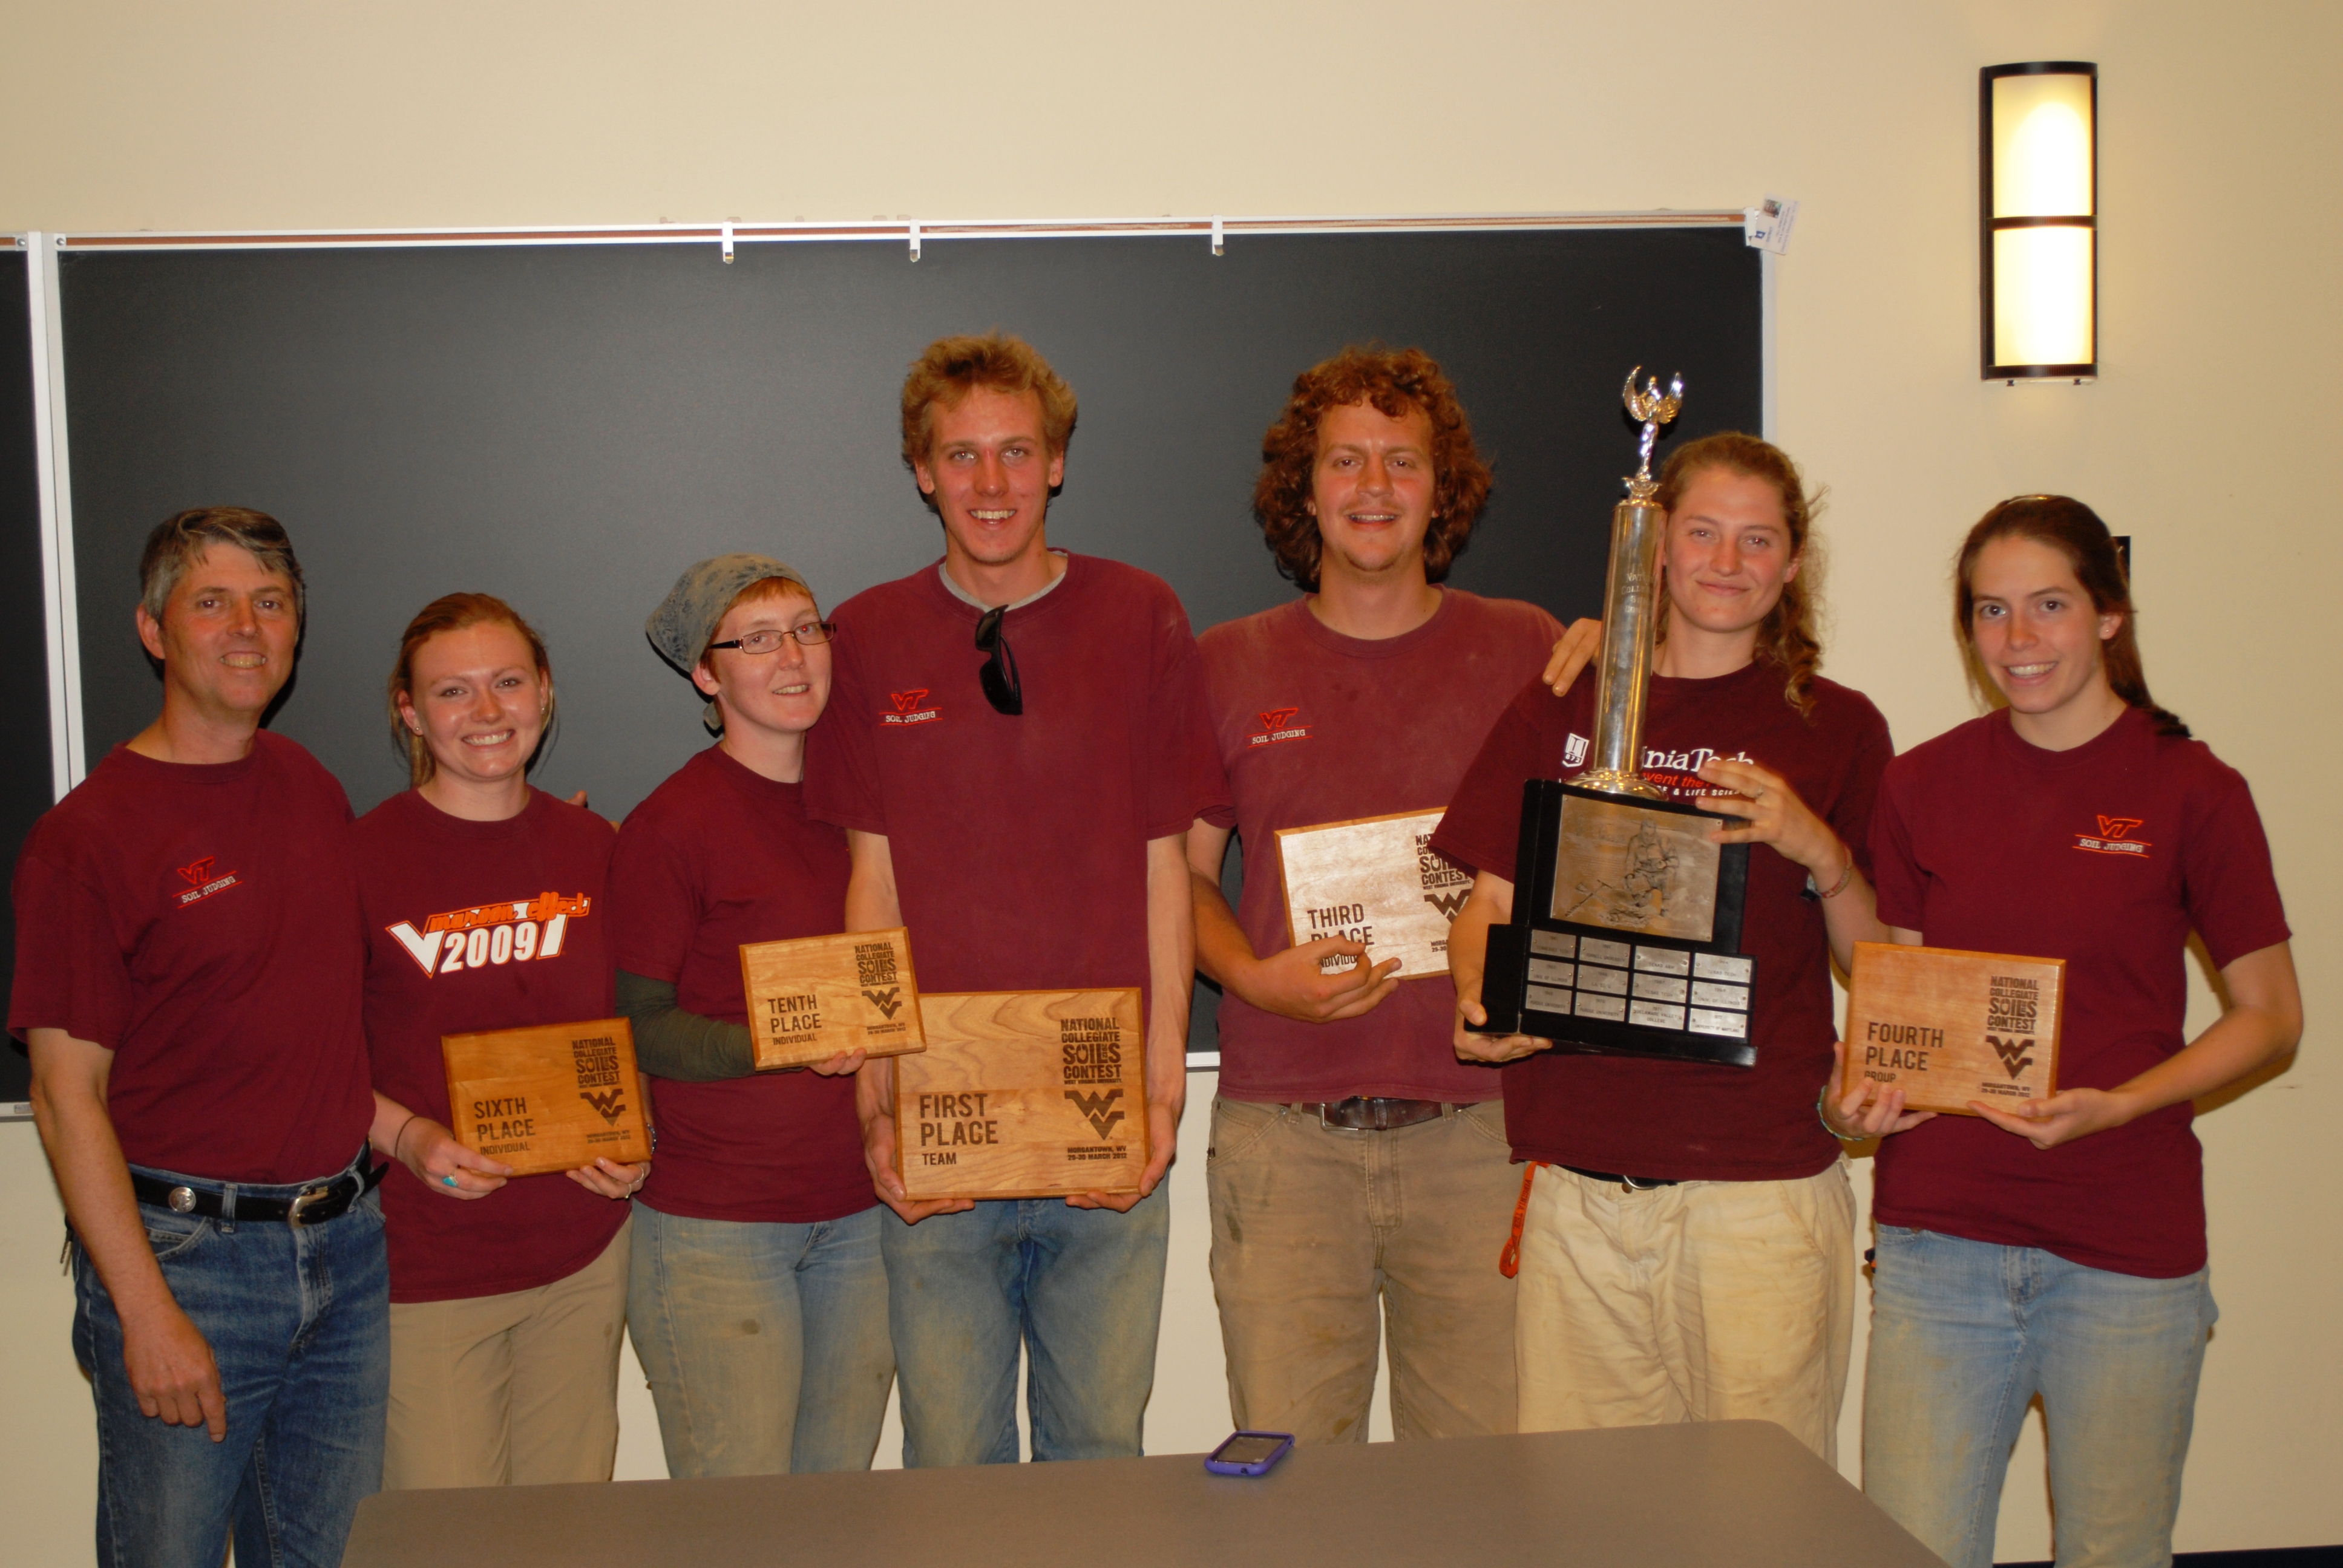 Students from the Department of Crop and Soil Environmental Sciences won the National Collegiate Soil Judging Championship